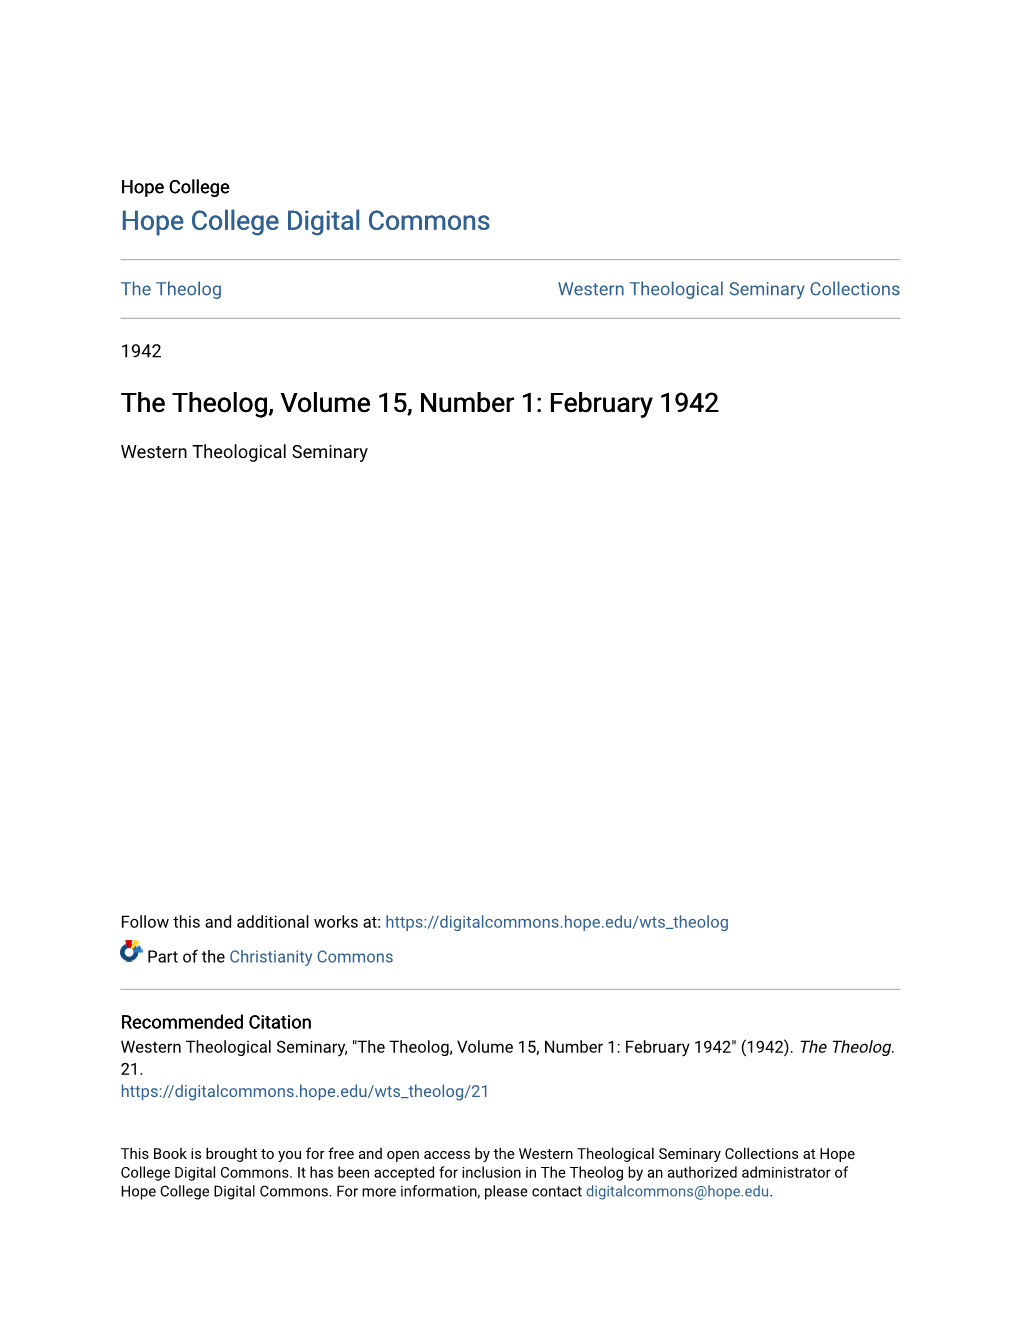 The Theolog, Volume 15, Number 1: February 1942